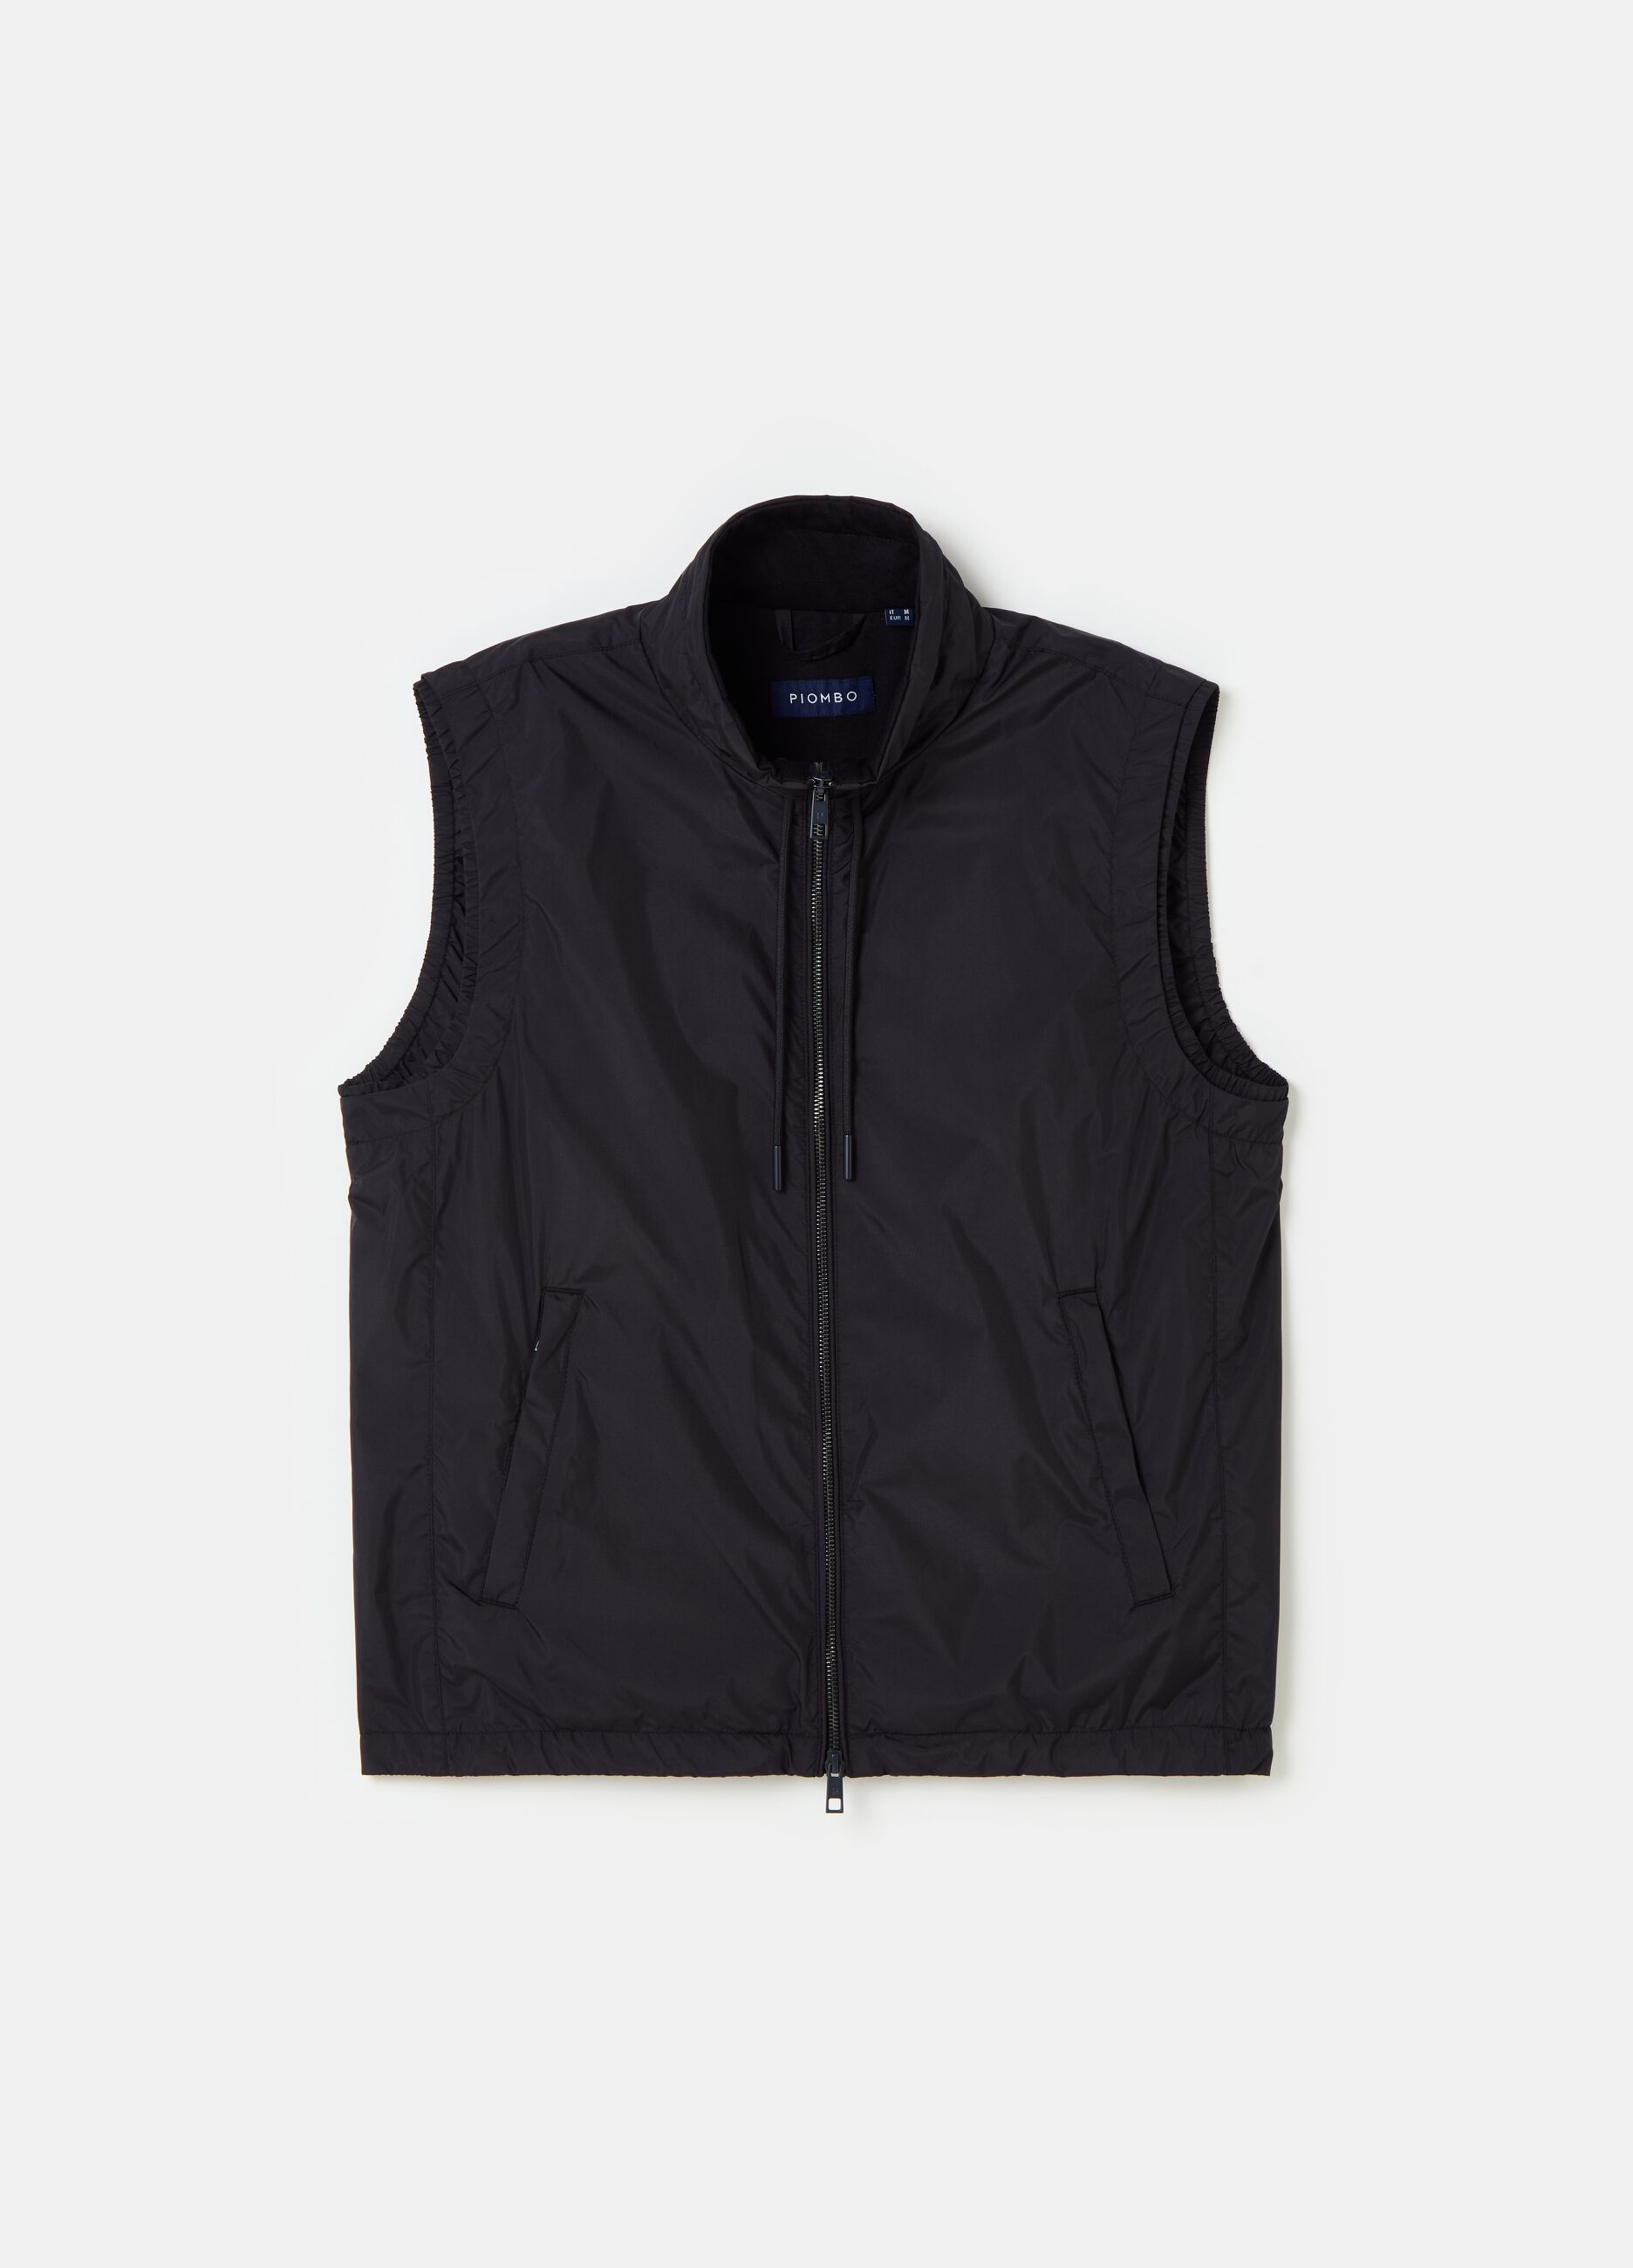 Contemporary full-zip gilet with high neck